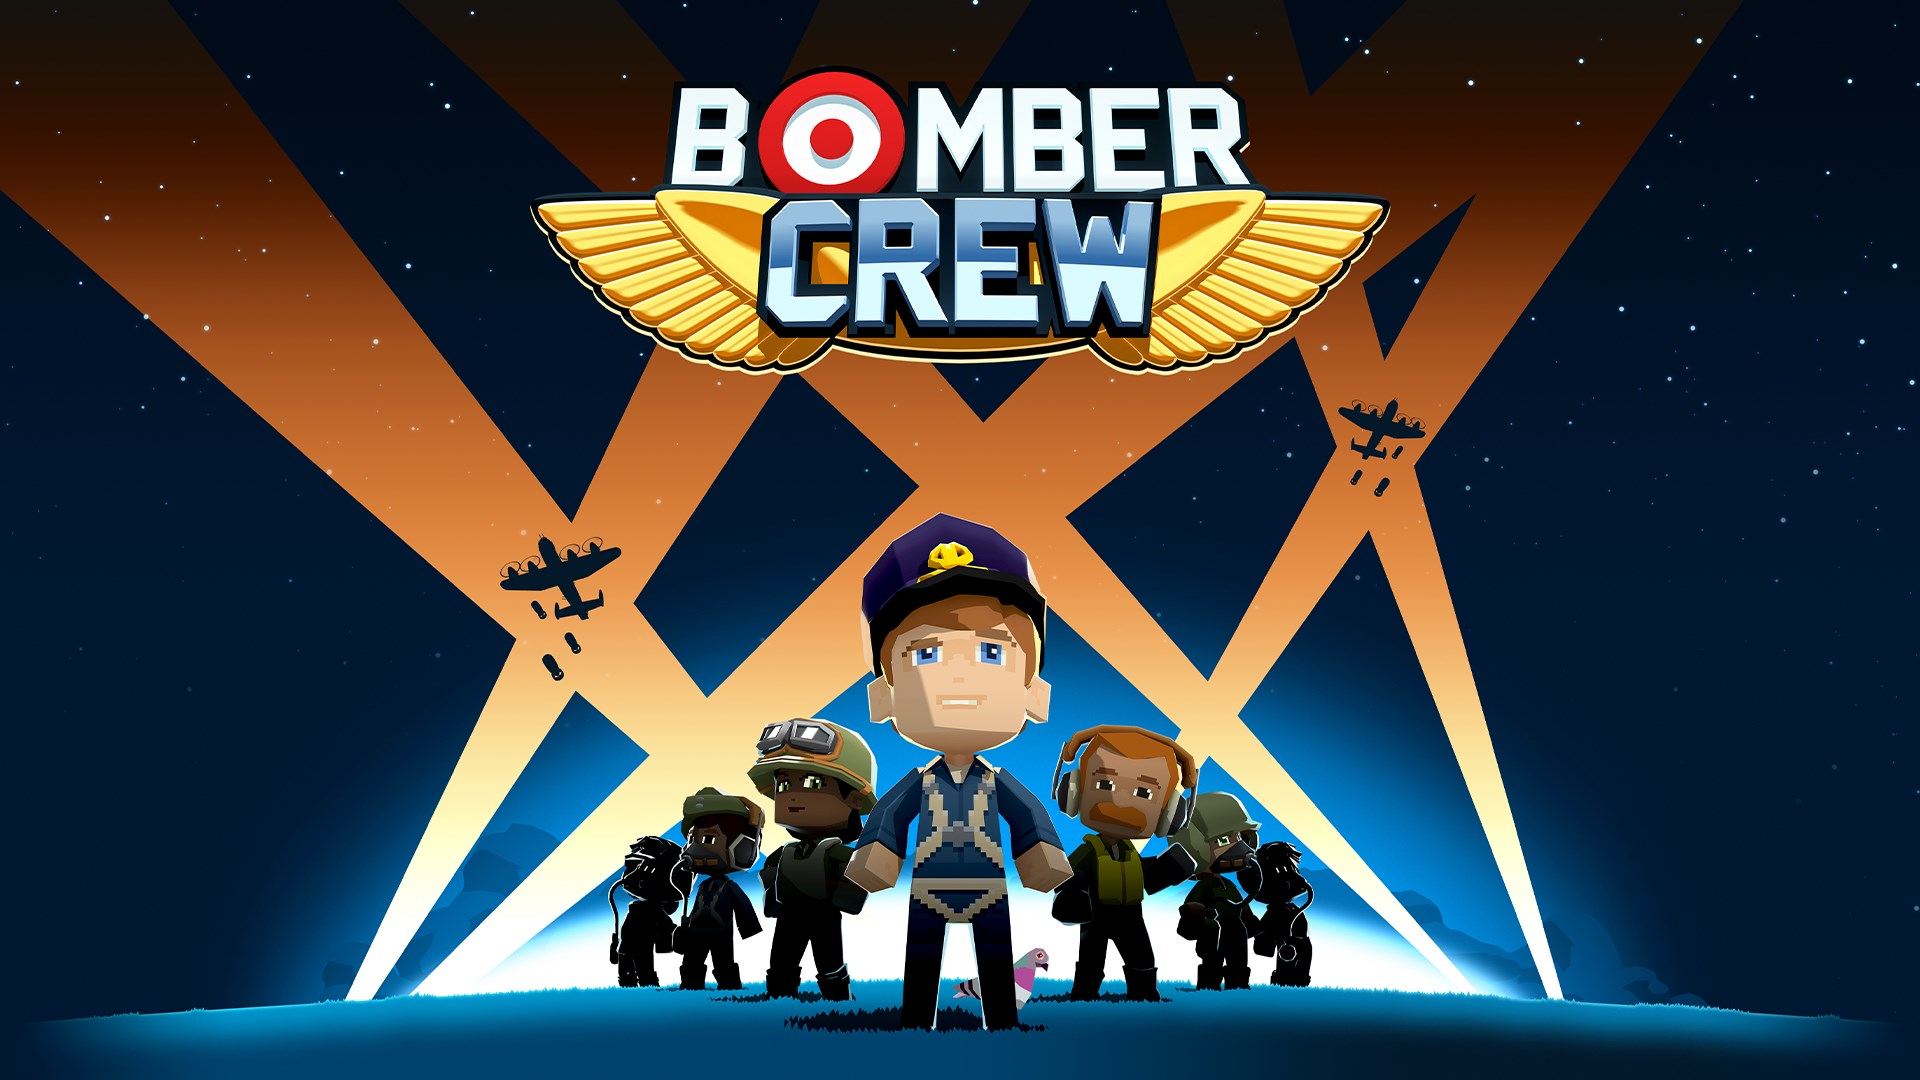 You can add the Bomber Crew game to your archive for free and permanently via Steam.